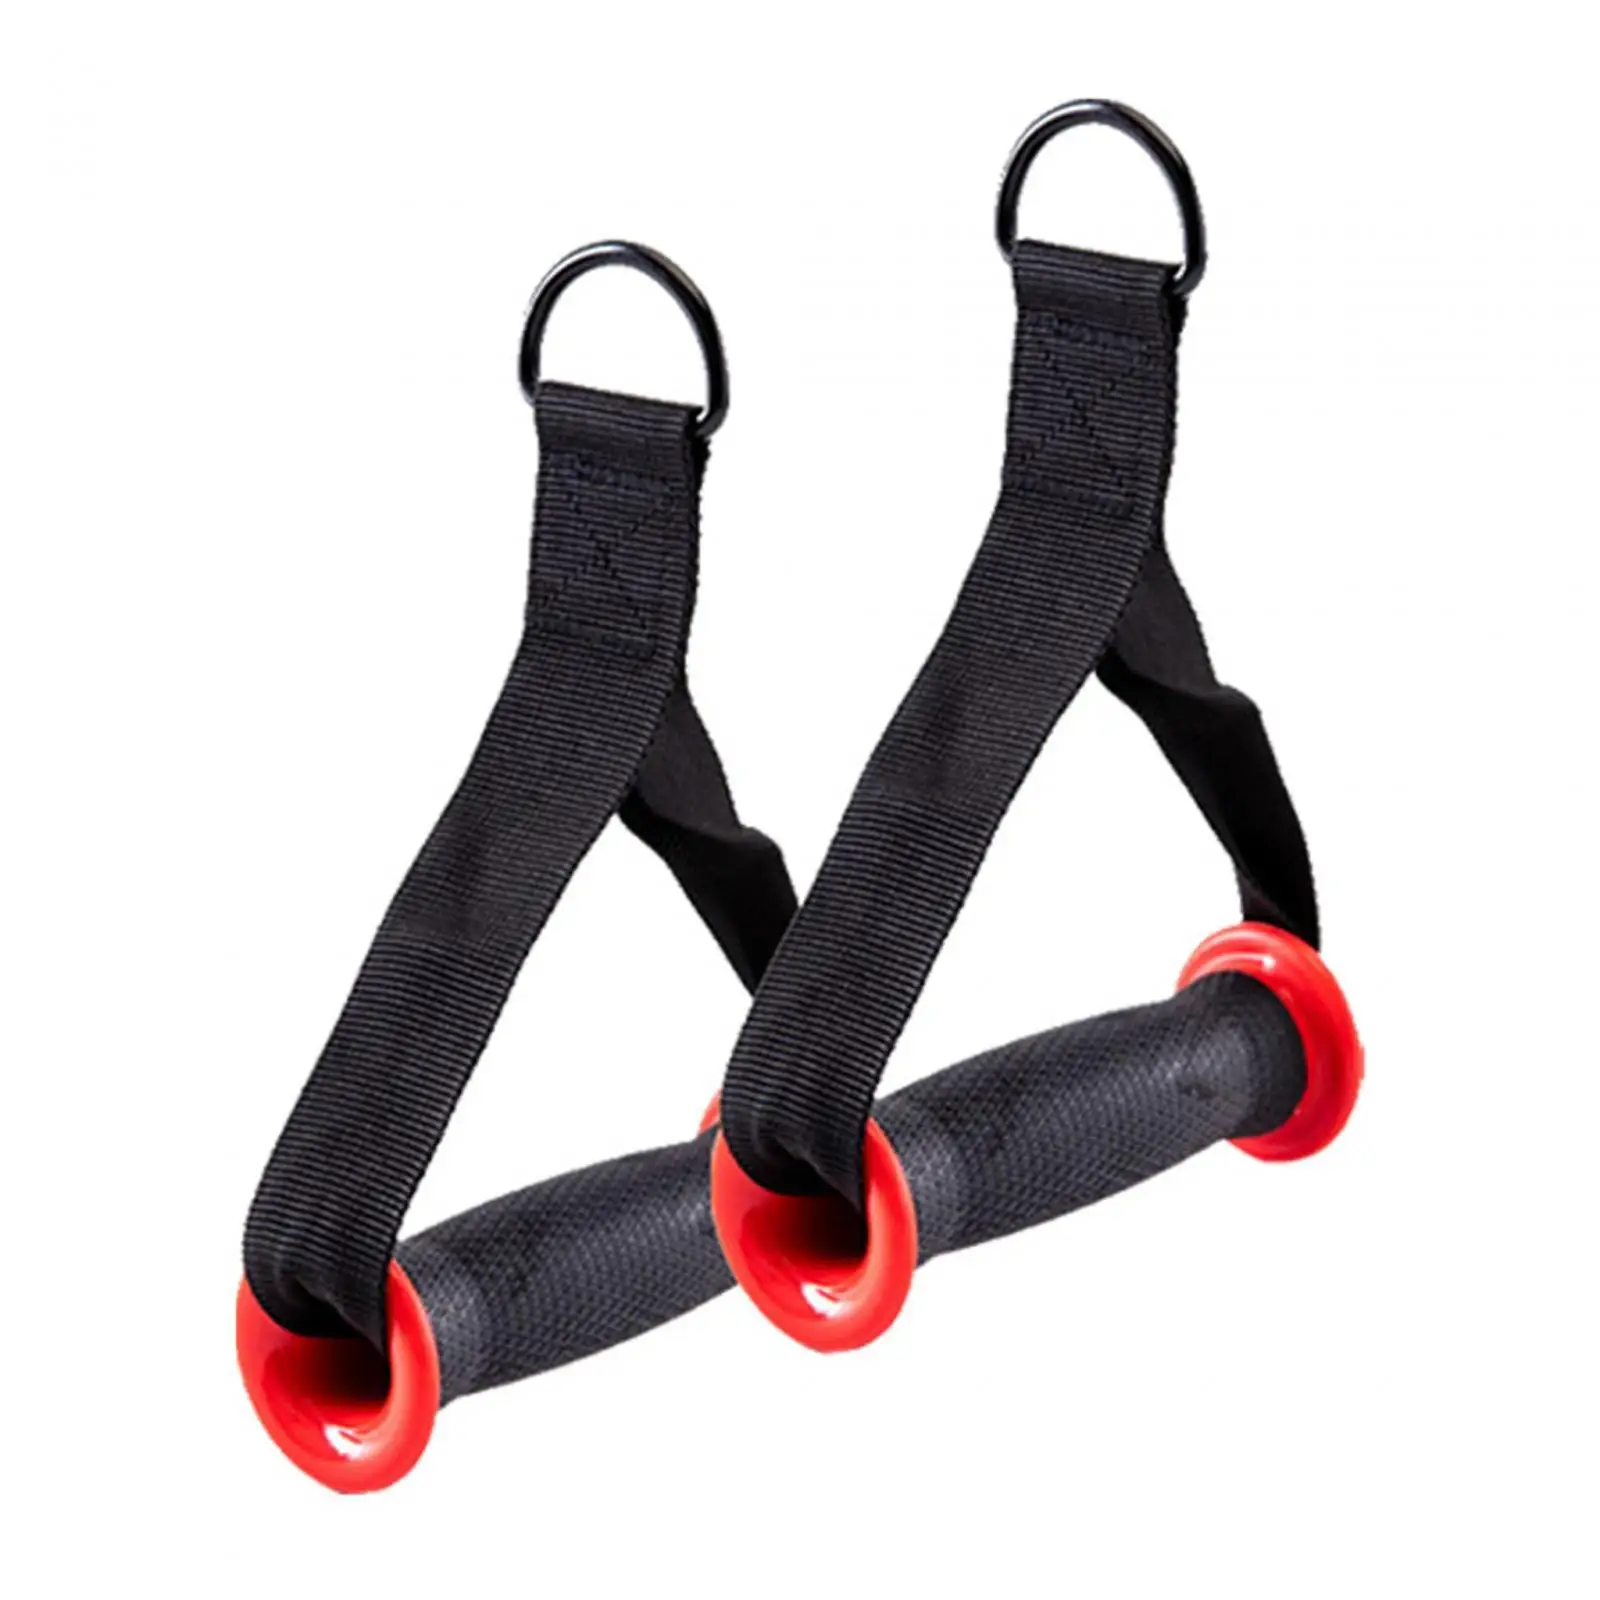 2Pcs Gym Handle Accessories Gym Accessory Exercise Workout Grips Cable Attachment Attachment Stirrup Heavy Duty Pull up Handles